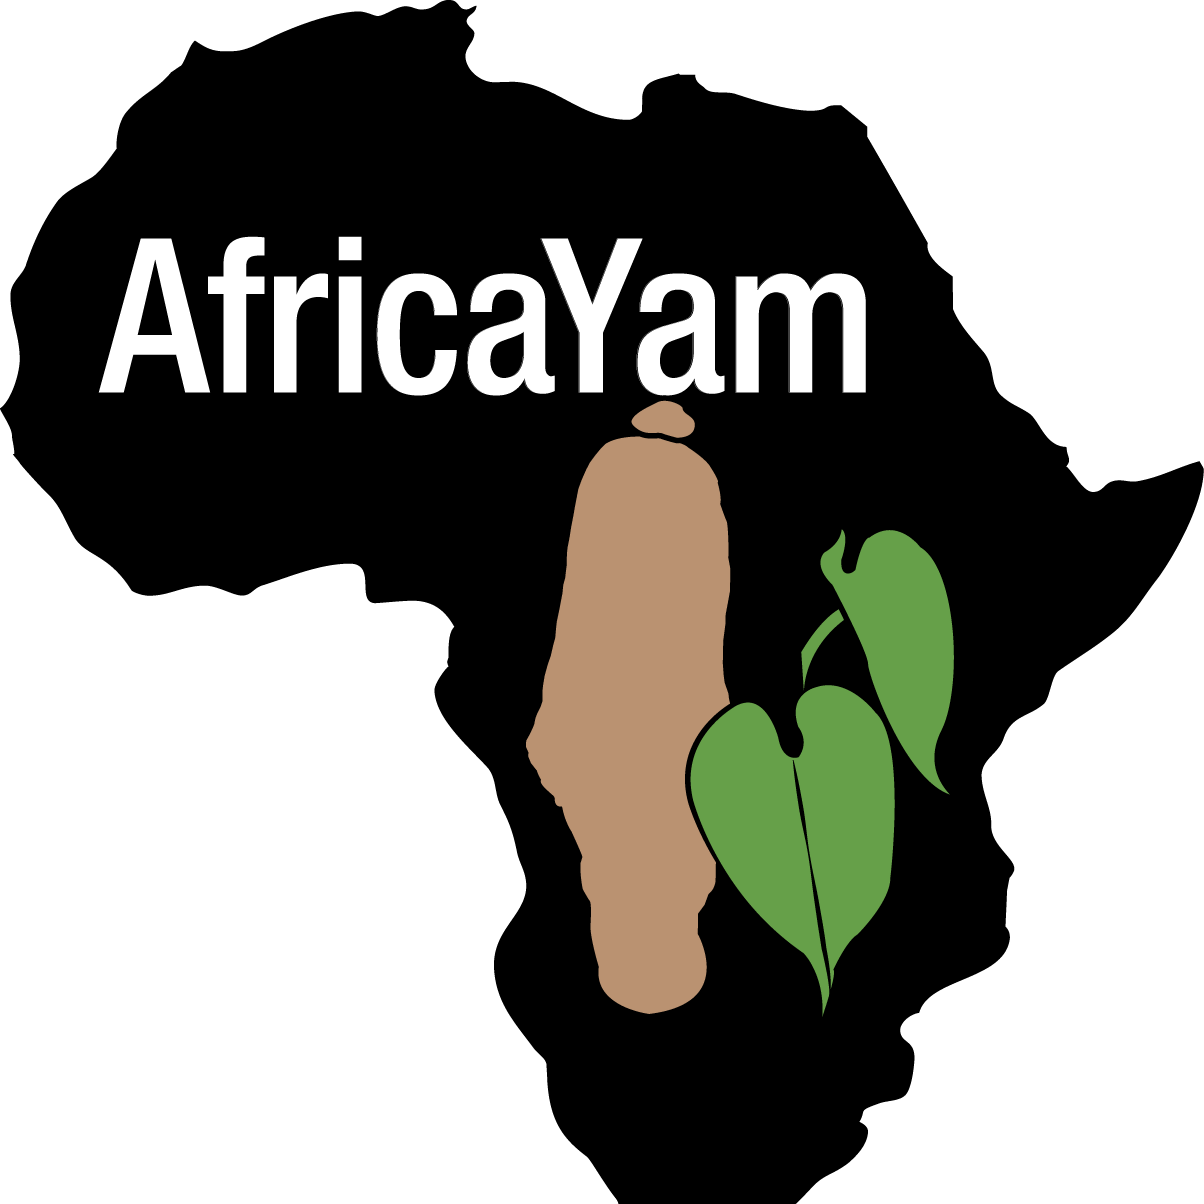 AfricaYam is a yam breeding project with specific focus on strengthening yam breeding in West Africa.

Retweets are not endorsement!